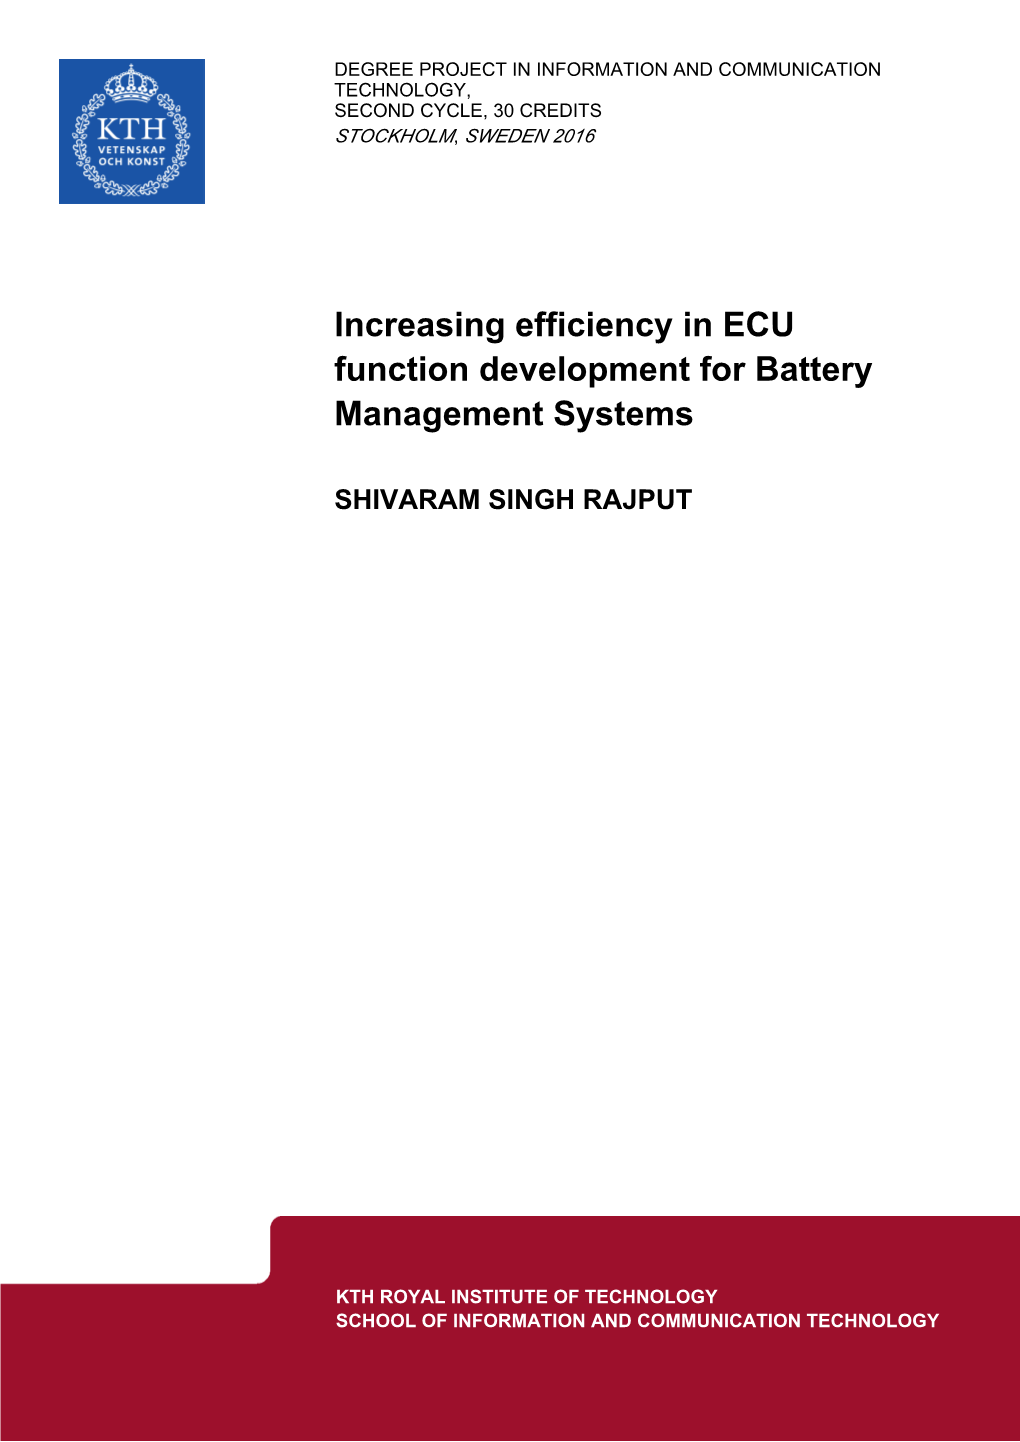 Increasing Efficiency in ECU Function Development for Battery Management Systems